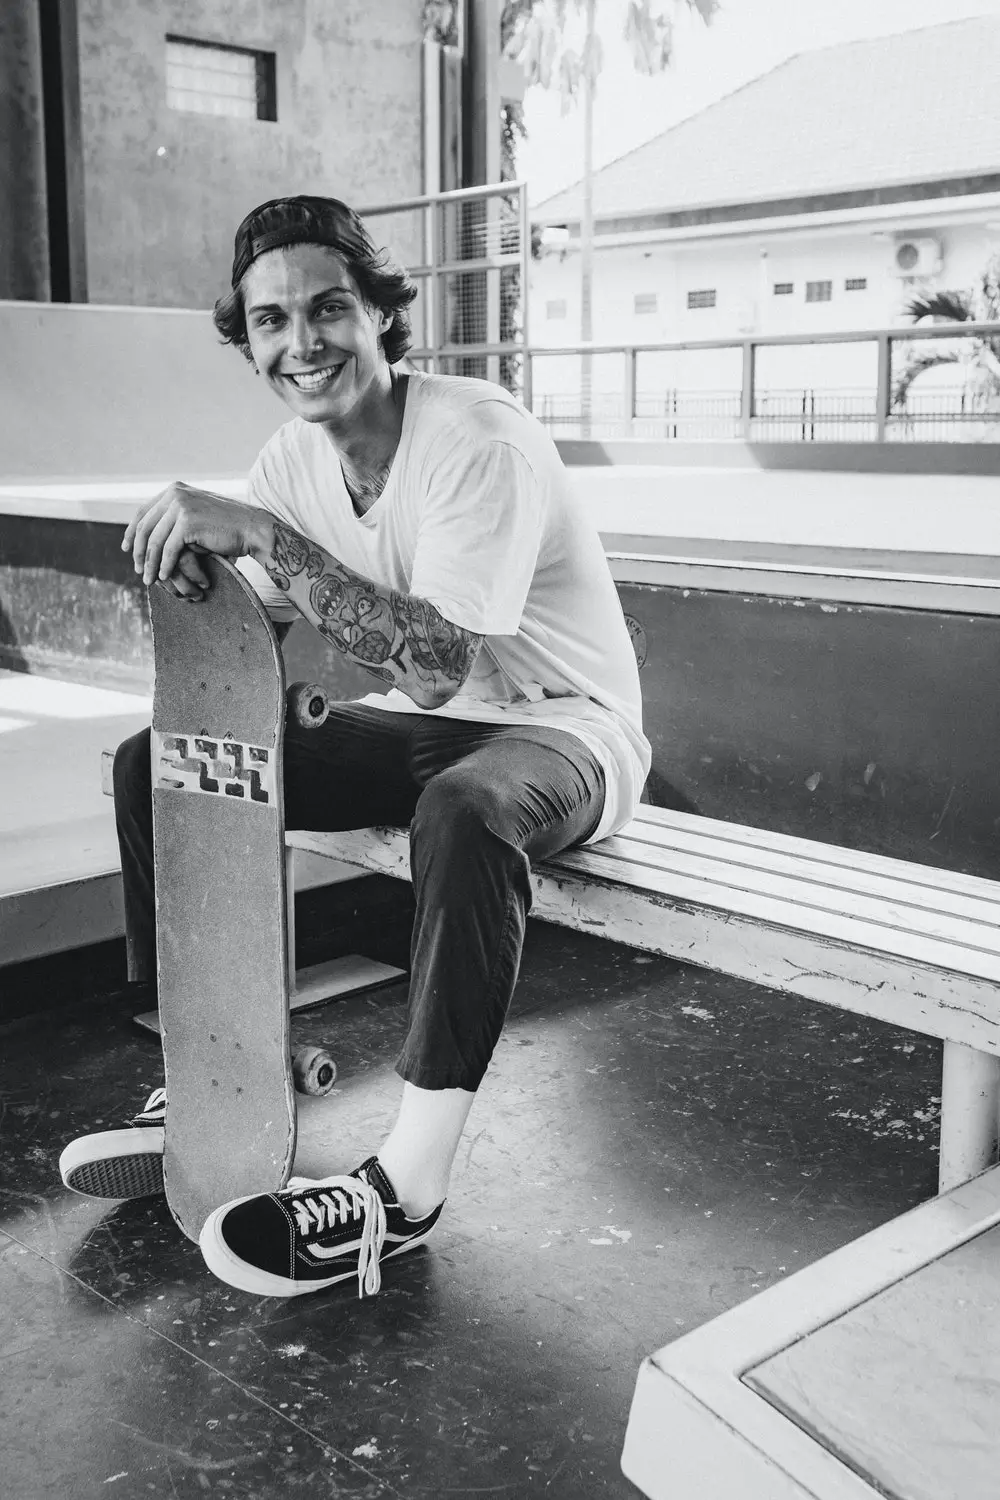 why does skateboarding make you happy